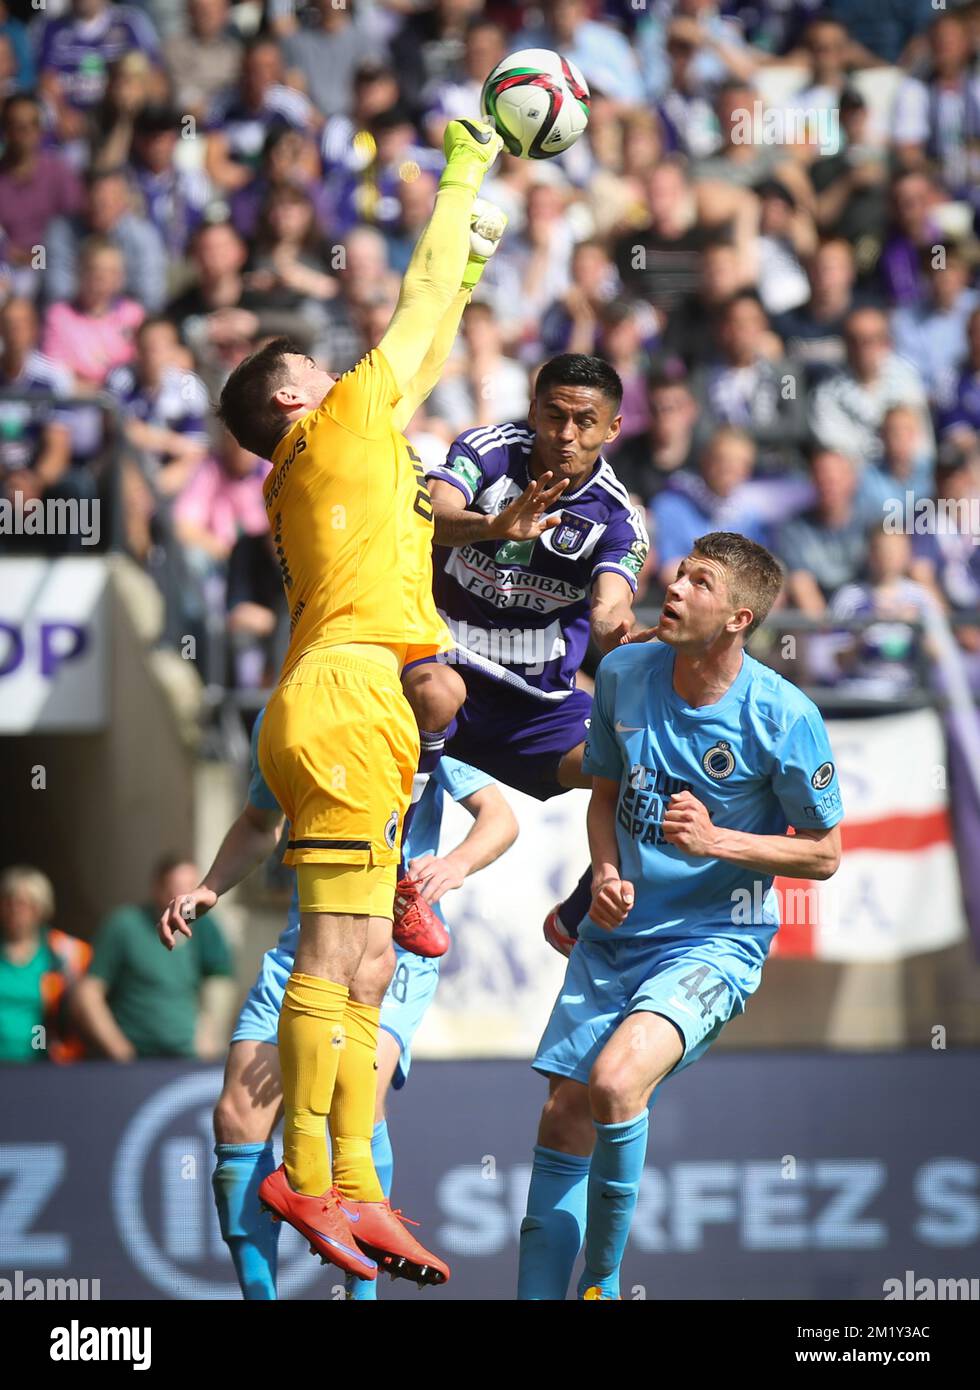 20150510 - BRUSSELS, BELGIUM: Club's goalkeeper Mathew Ryan and Anderlecht's Andy Najar fight for the ball during the Jupiler Pro League match between RSC Anderlecht and Club Brugge, Sunday 10 May 2015 in Brussels, on the seventh day of the Play-off 1. BELGA PHOTO VIRGINIE LEFOUR Stock Photo